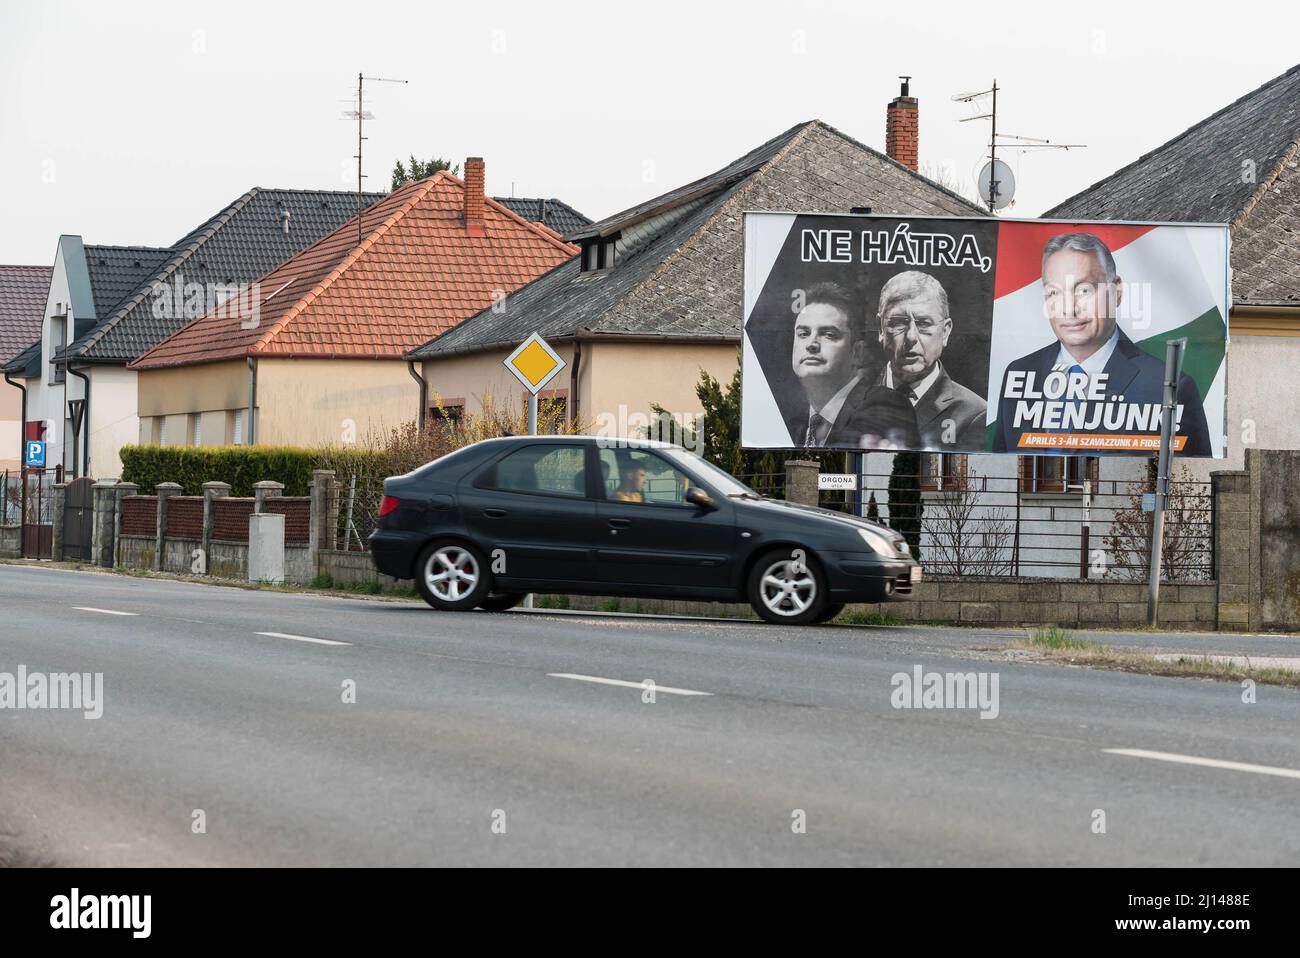 March 18, 2022, Mosonmagyarovar, Hungary: Car pass by election billboard for Fidesz party placed on the street of Mosonmagyarovar. On the billboard (from left to right) the leader of opposition Peter Marki-Zay, former prime minister Ferenc Gyurcsany, and Hungarian prime minister and leader of Fidesz Viktor Orban. Mosonmagyarovar is the town in northwest Hungary located approx. 160 kilometers from Hungarian capital Budapest. Peter Marki-Zay will challenge prime minister Viktor Orban in the upcoming parliamentary elections, which will be held on the 3rd of April 2022. (Credit Image: © Tomas Tkac Stock Photo